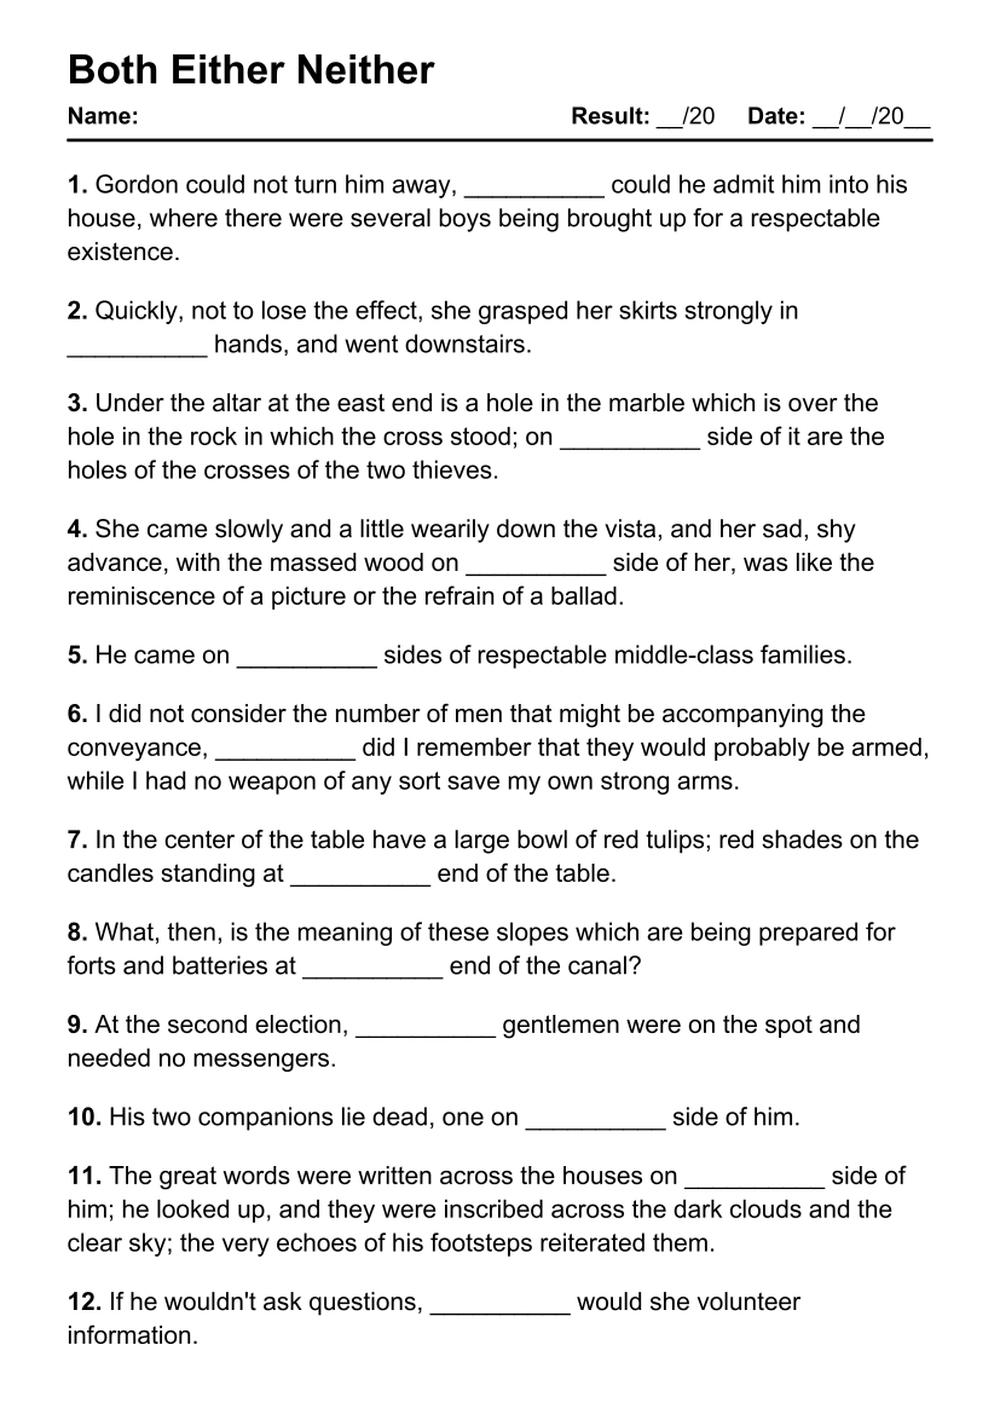 Printable Both Either Neither Exercises - PDF Worksheet with Answers - Test 35